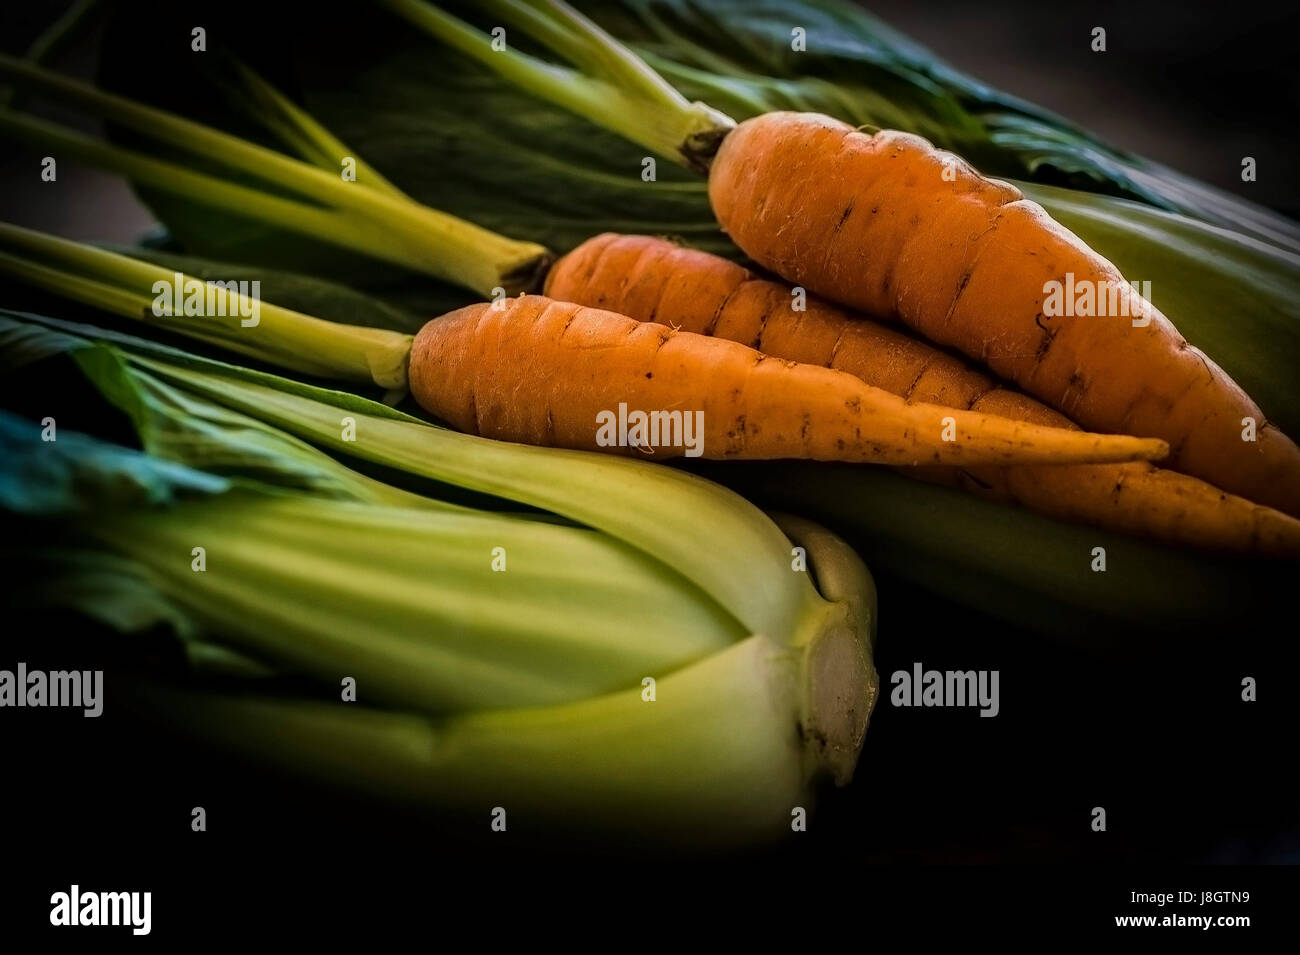 A closeup view of vegetables; Baby carrots; Pak choi; Food; Raw; Nutritious; Nutrition; Healthy food Stock Photo